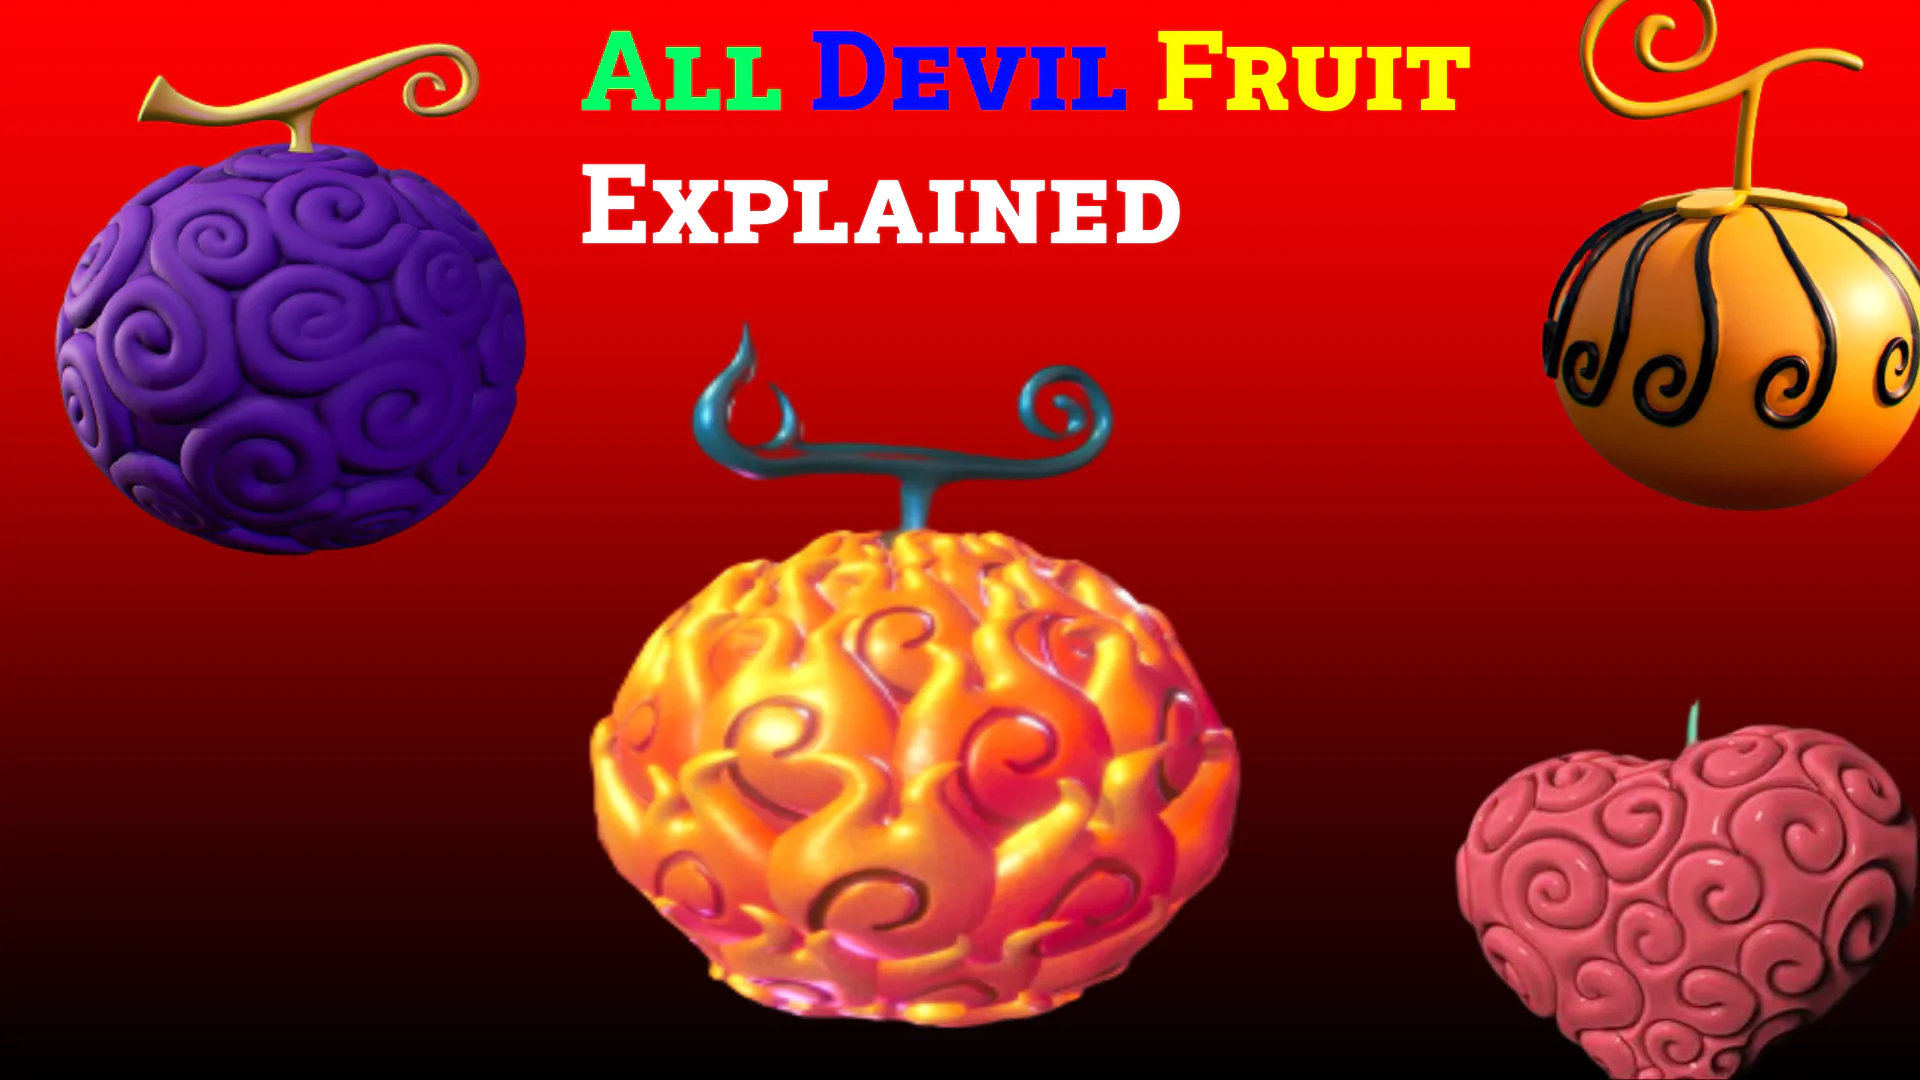 all-devil-fruit-in-one-piece-explained-friction-info